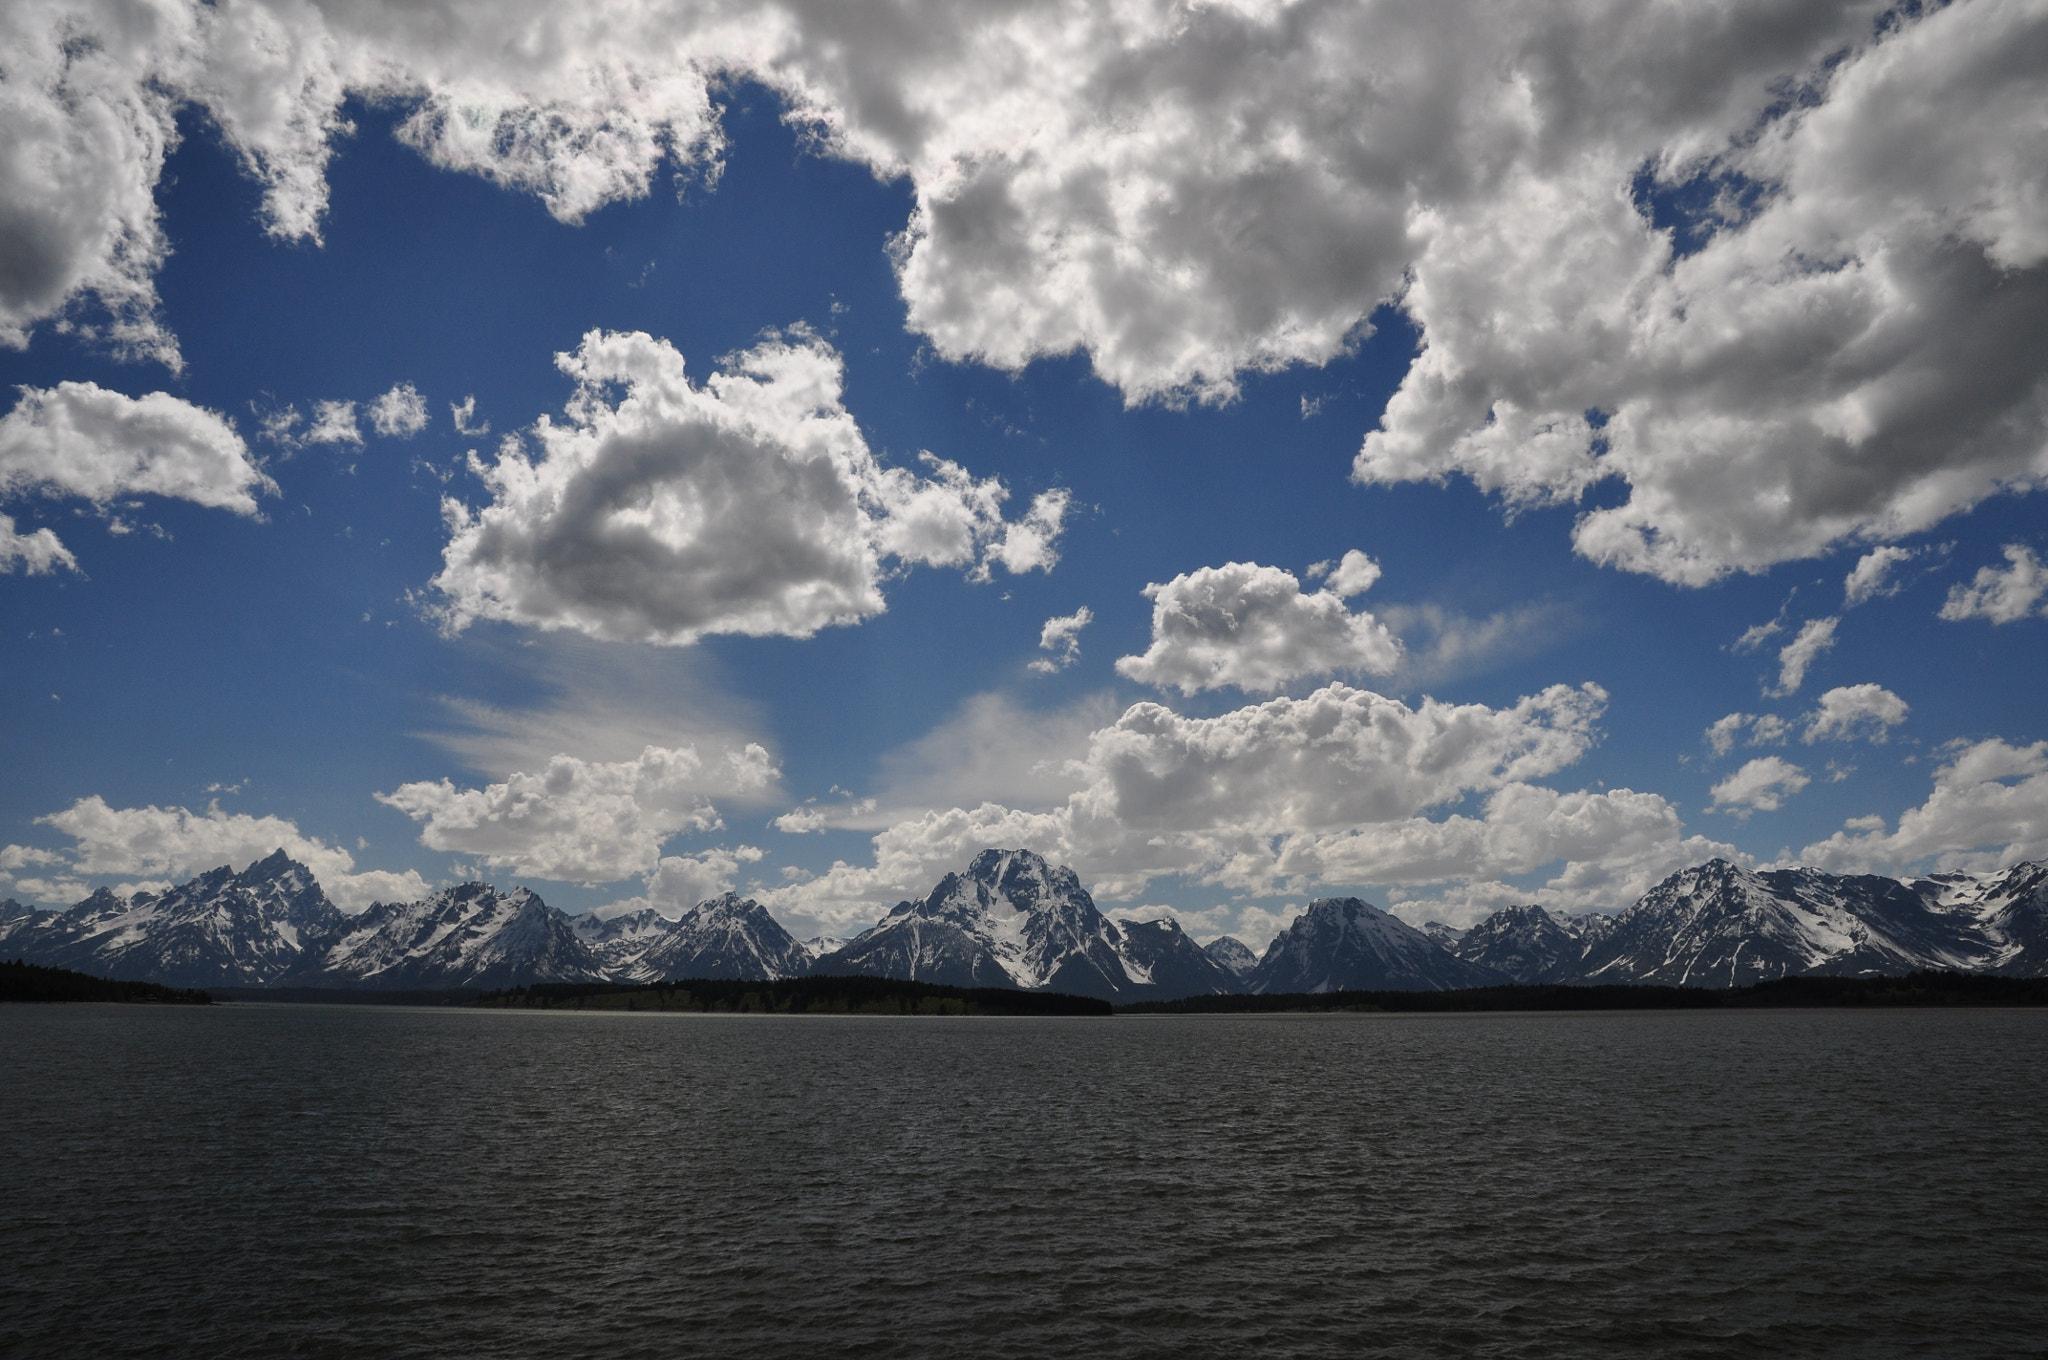 Nikon D90 + Nikon AF-S DX Nikkor 16-85mm F3.5-5.6G ED VR sample photo. Clouds fixed in a steely blue sky in the grand tetons national park photography